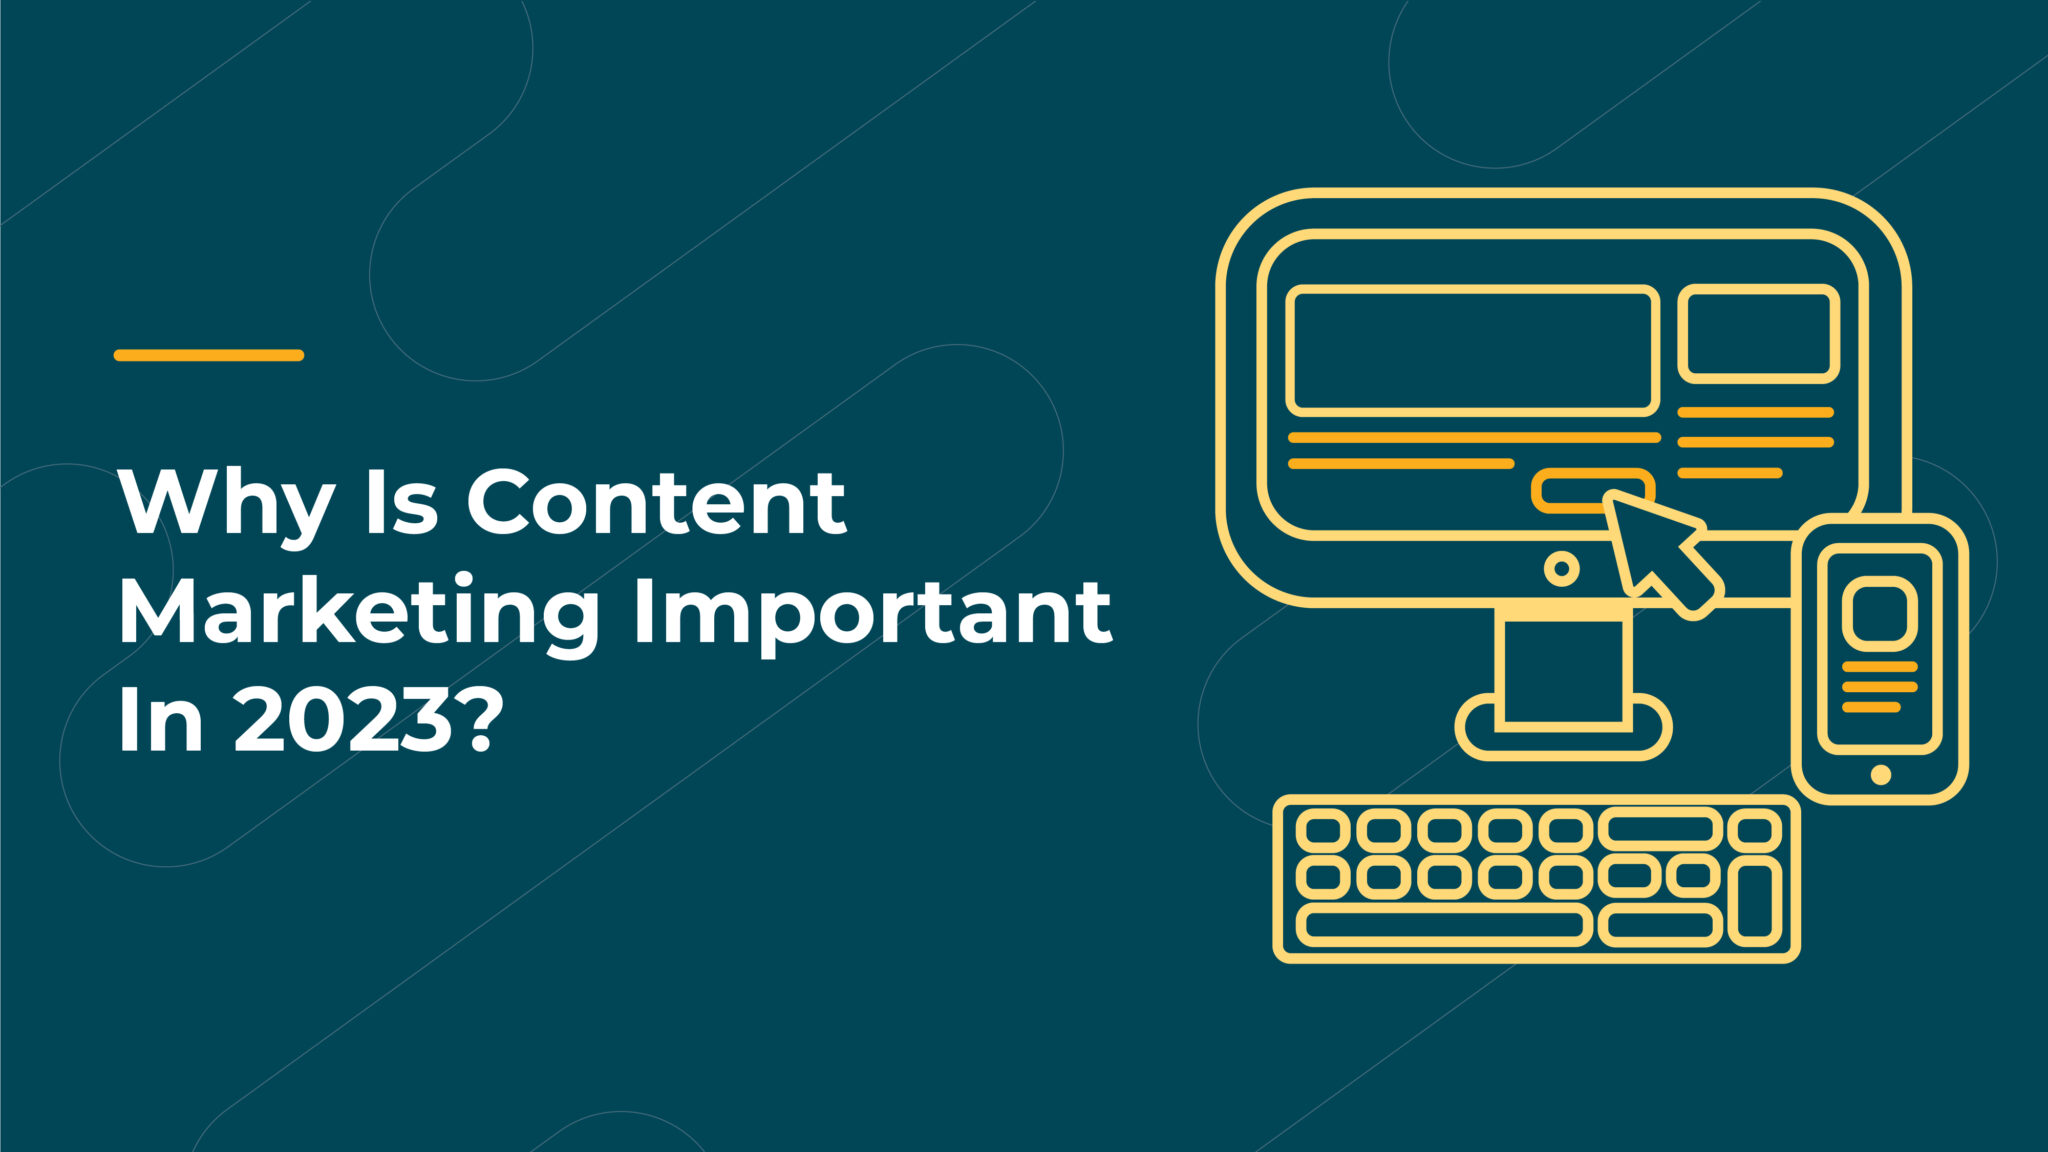 Why Is Content Marketing Important In 2023?